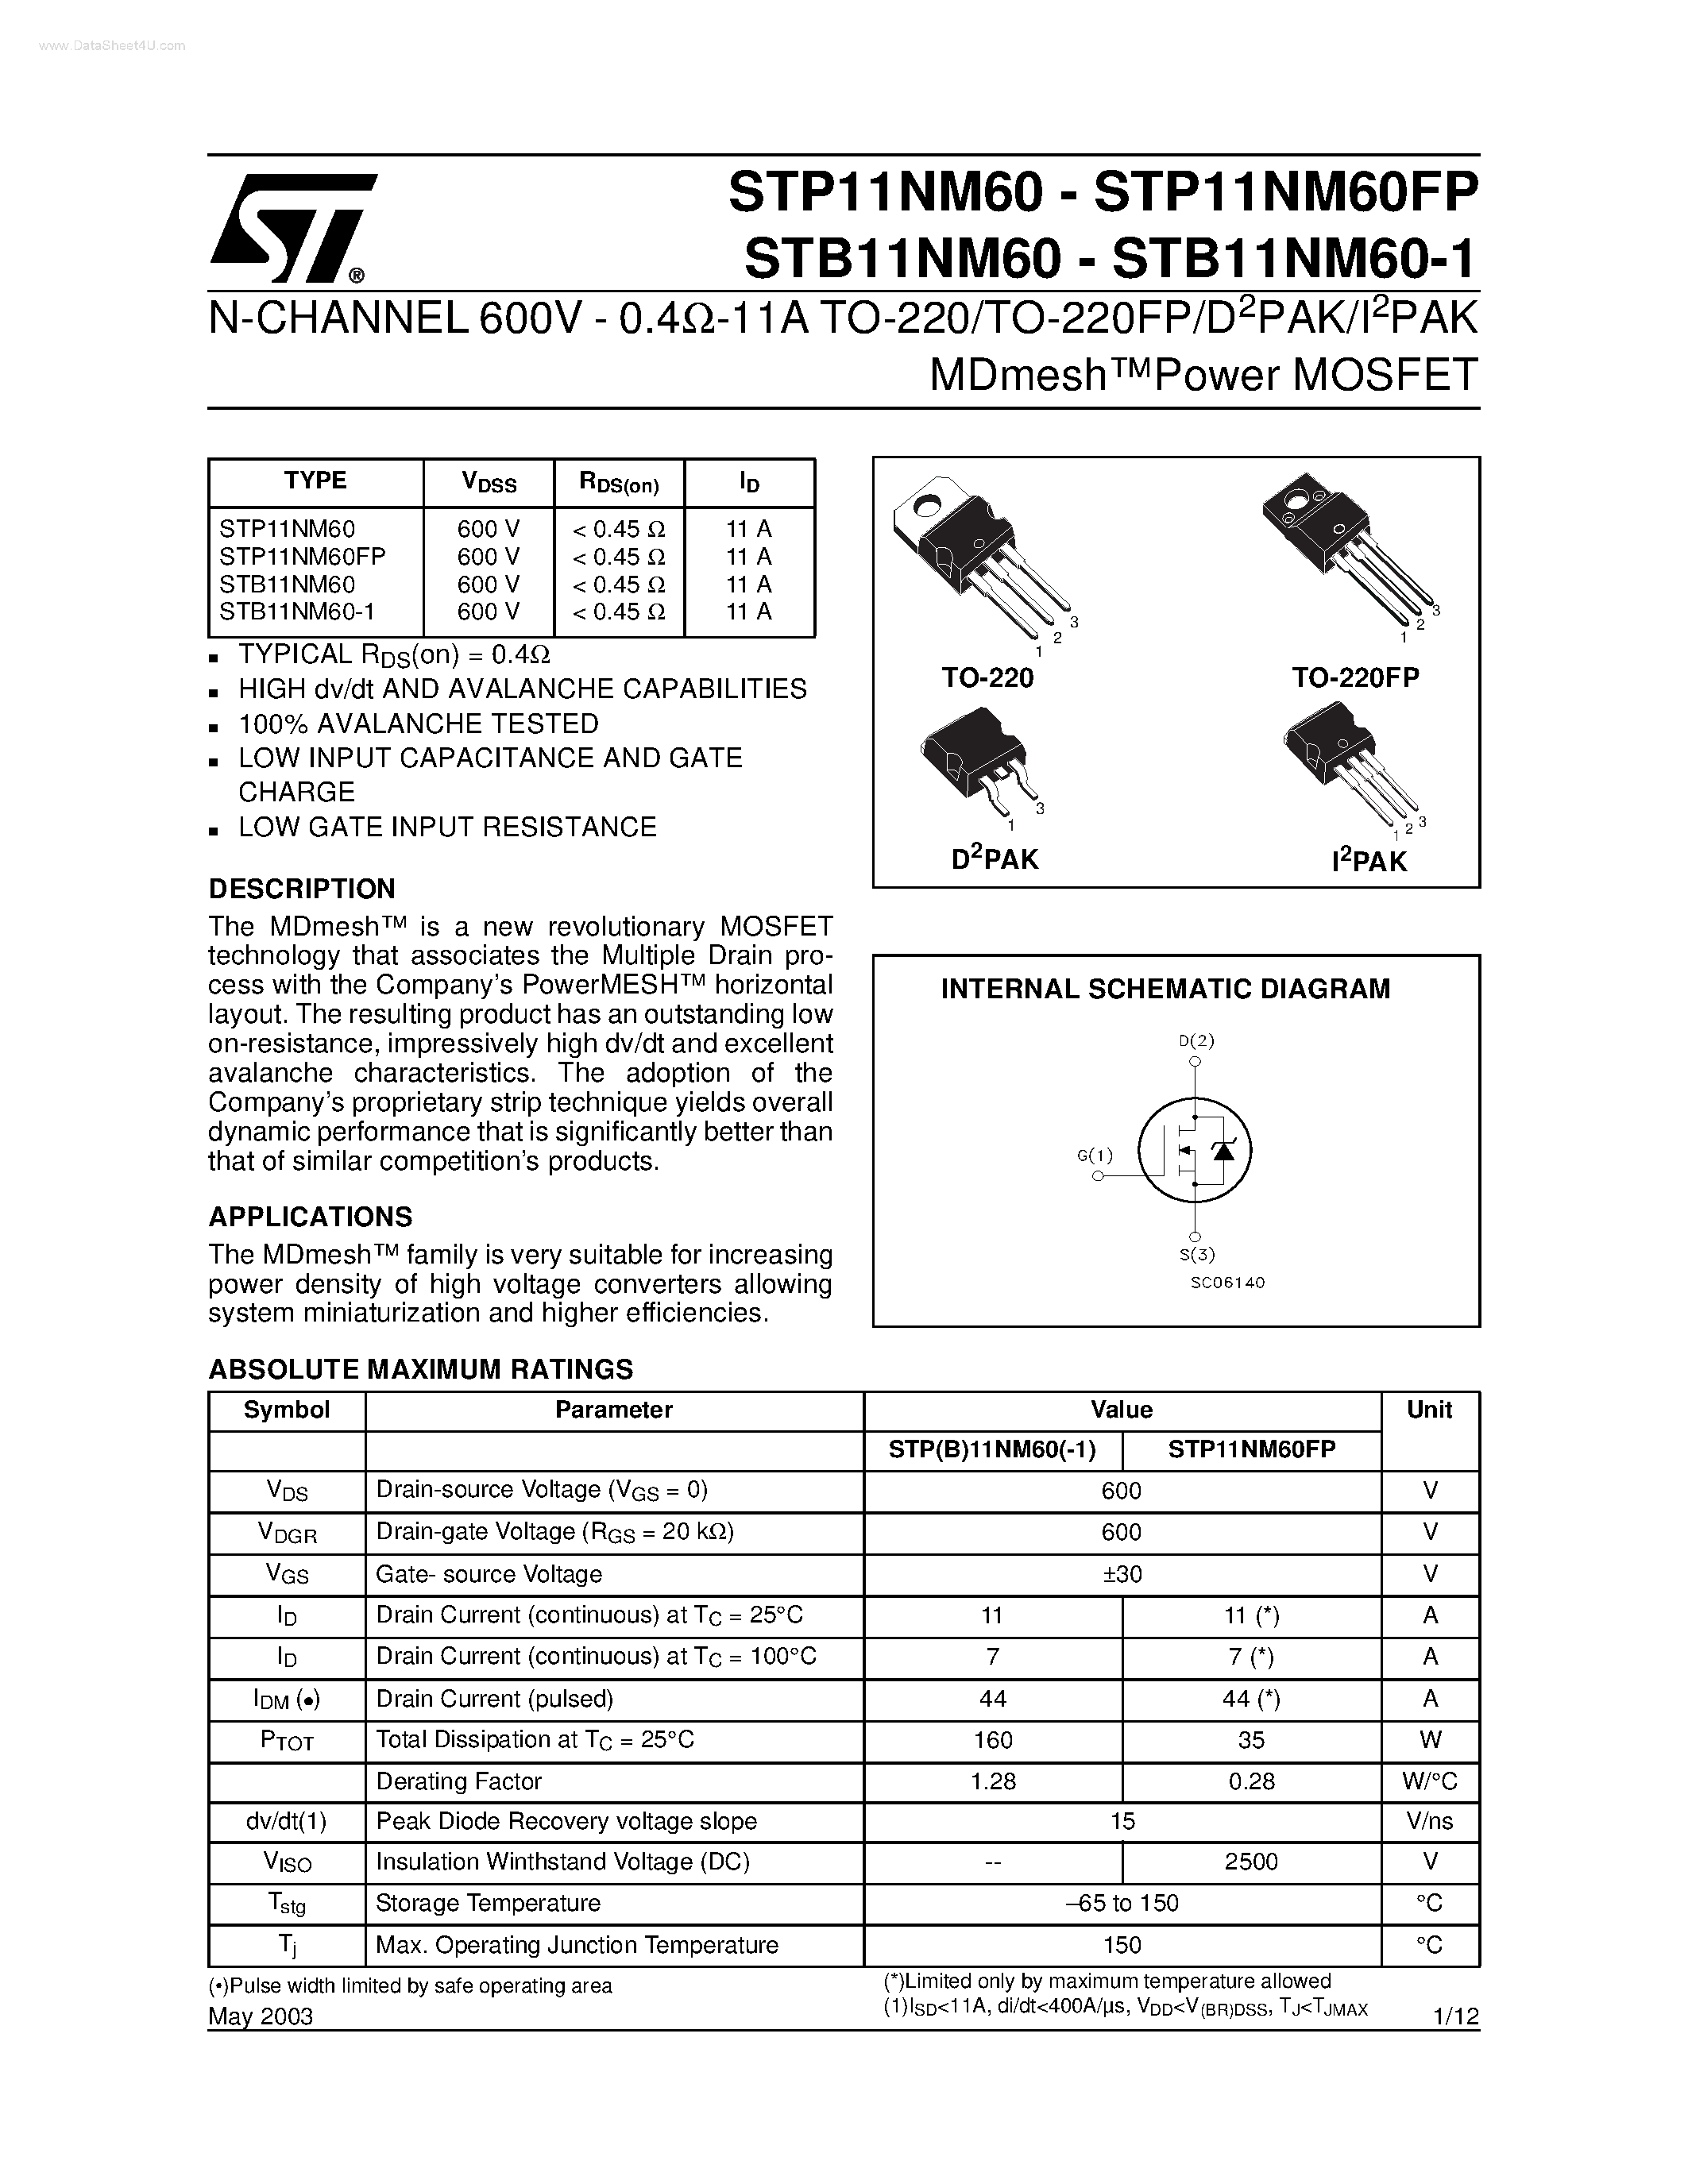 Datasheet STP11NM60 - N-CHANNEL Power MOSFET page 1